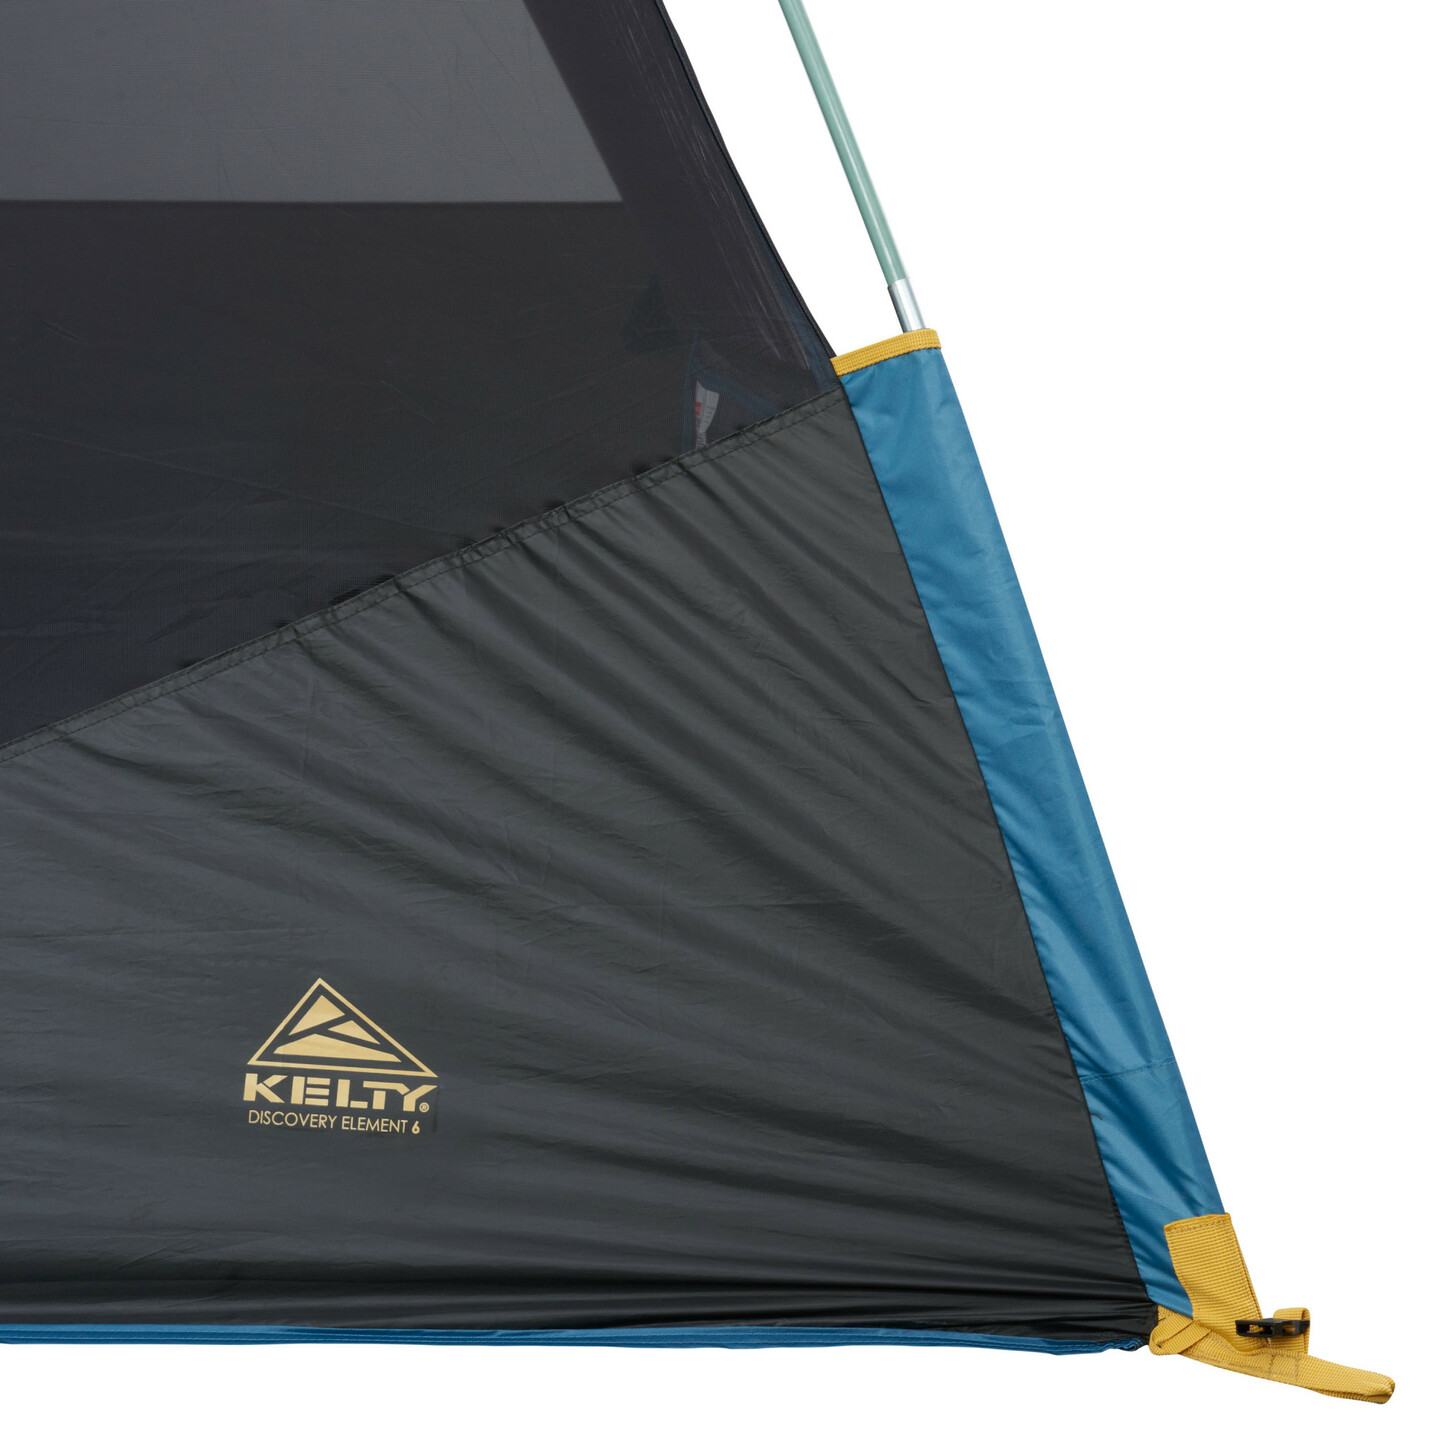 Kelty Discovery Element 6 Tent